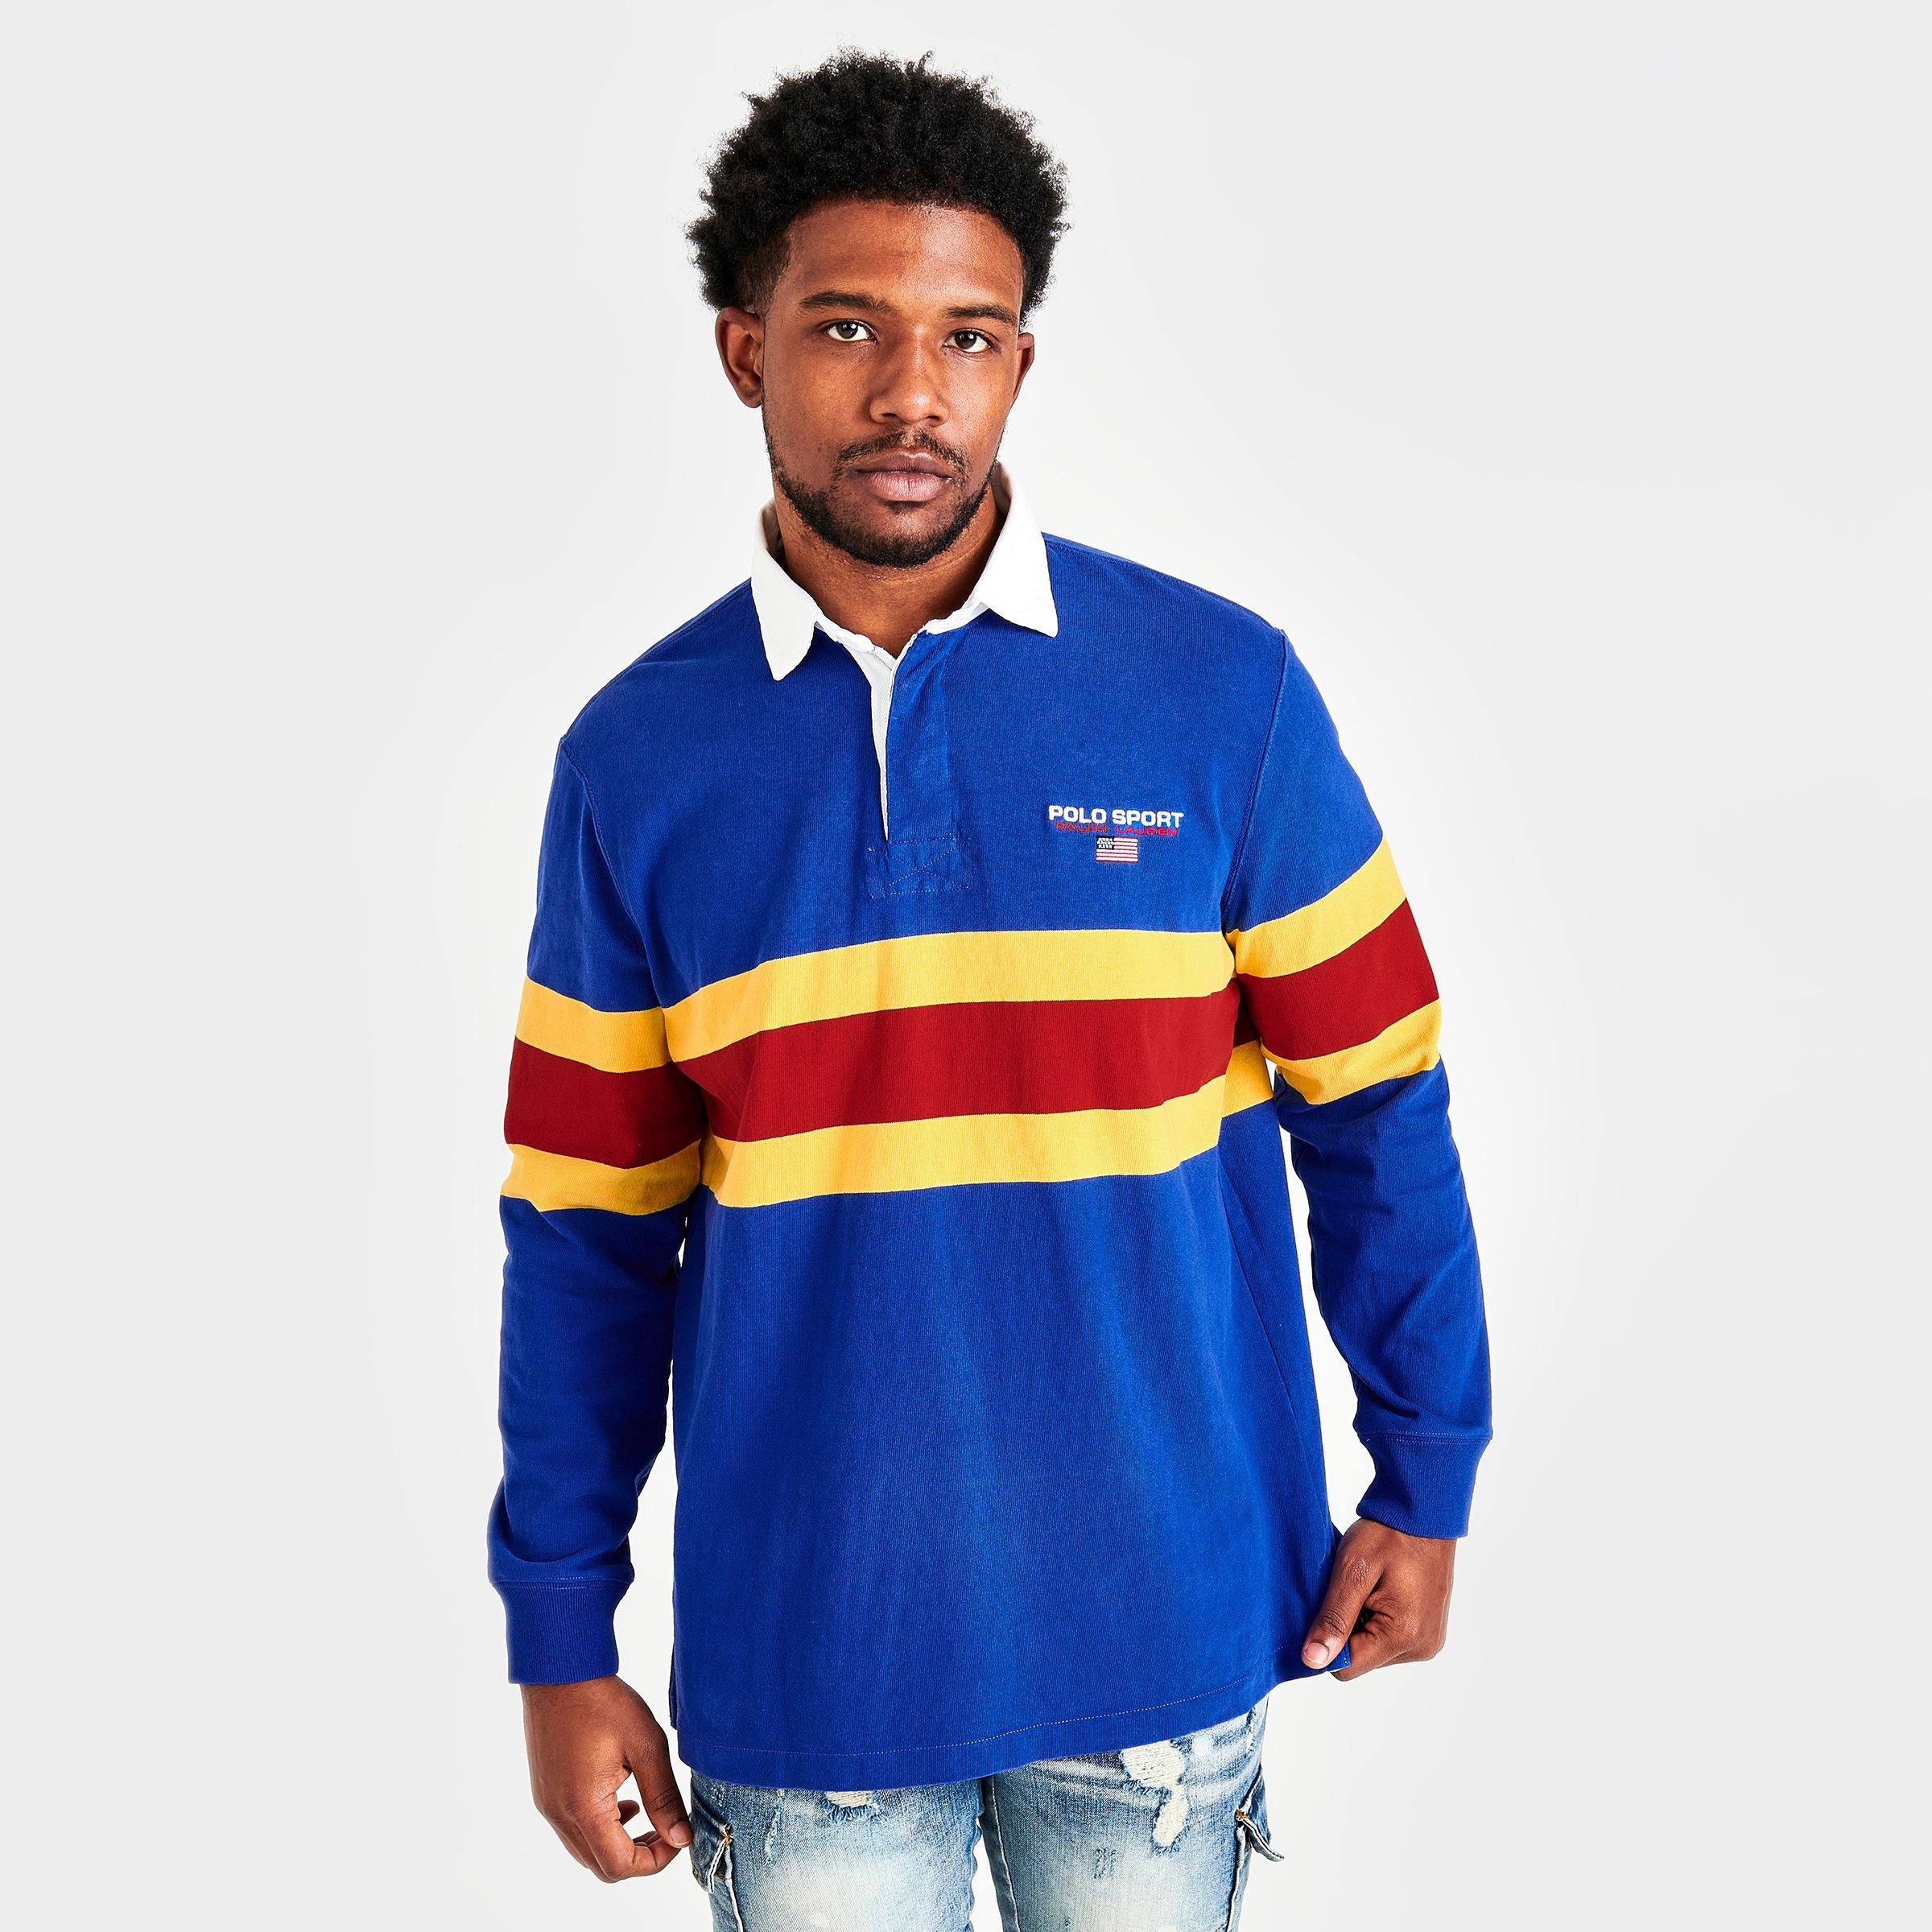 POLO RALPH LAUREN POLO RALPH LAUREN MEN'S POLO SPORT LONG-SLEEVE RUGBY SHIRT